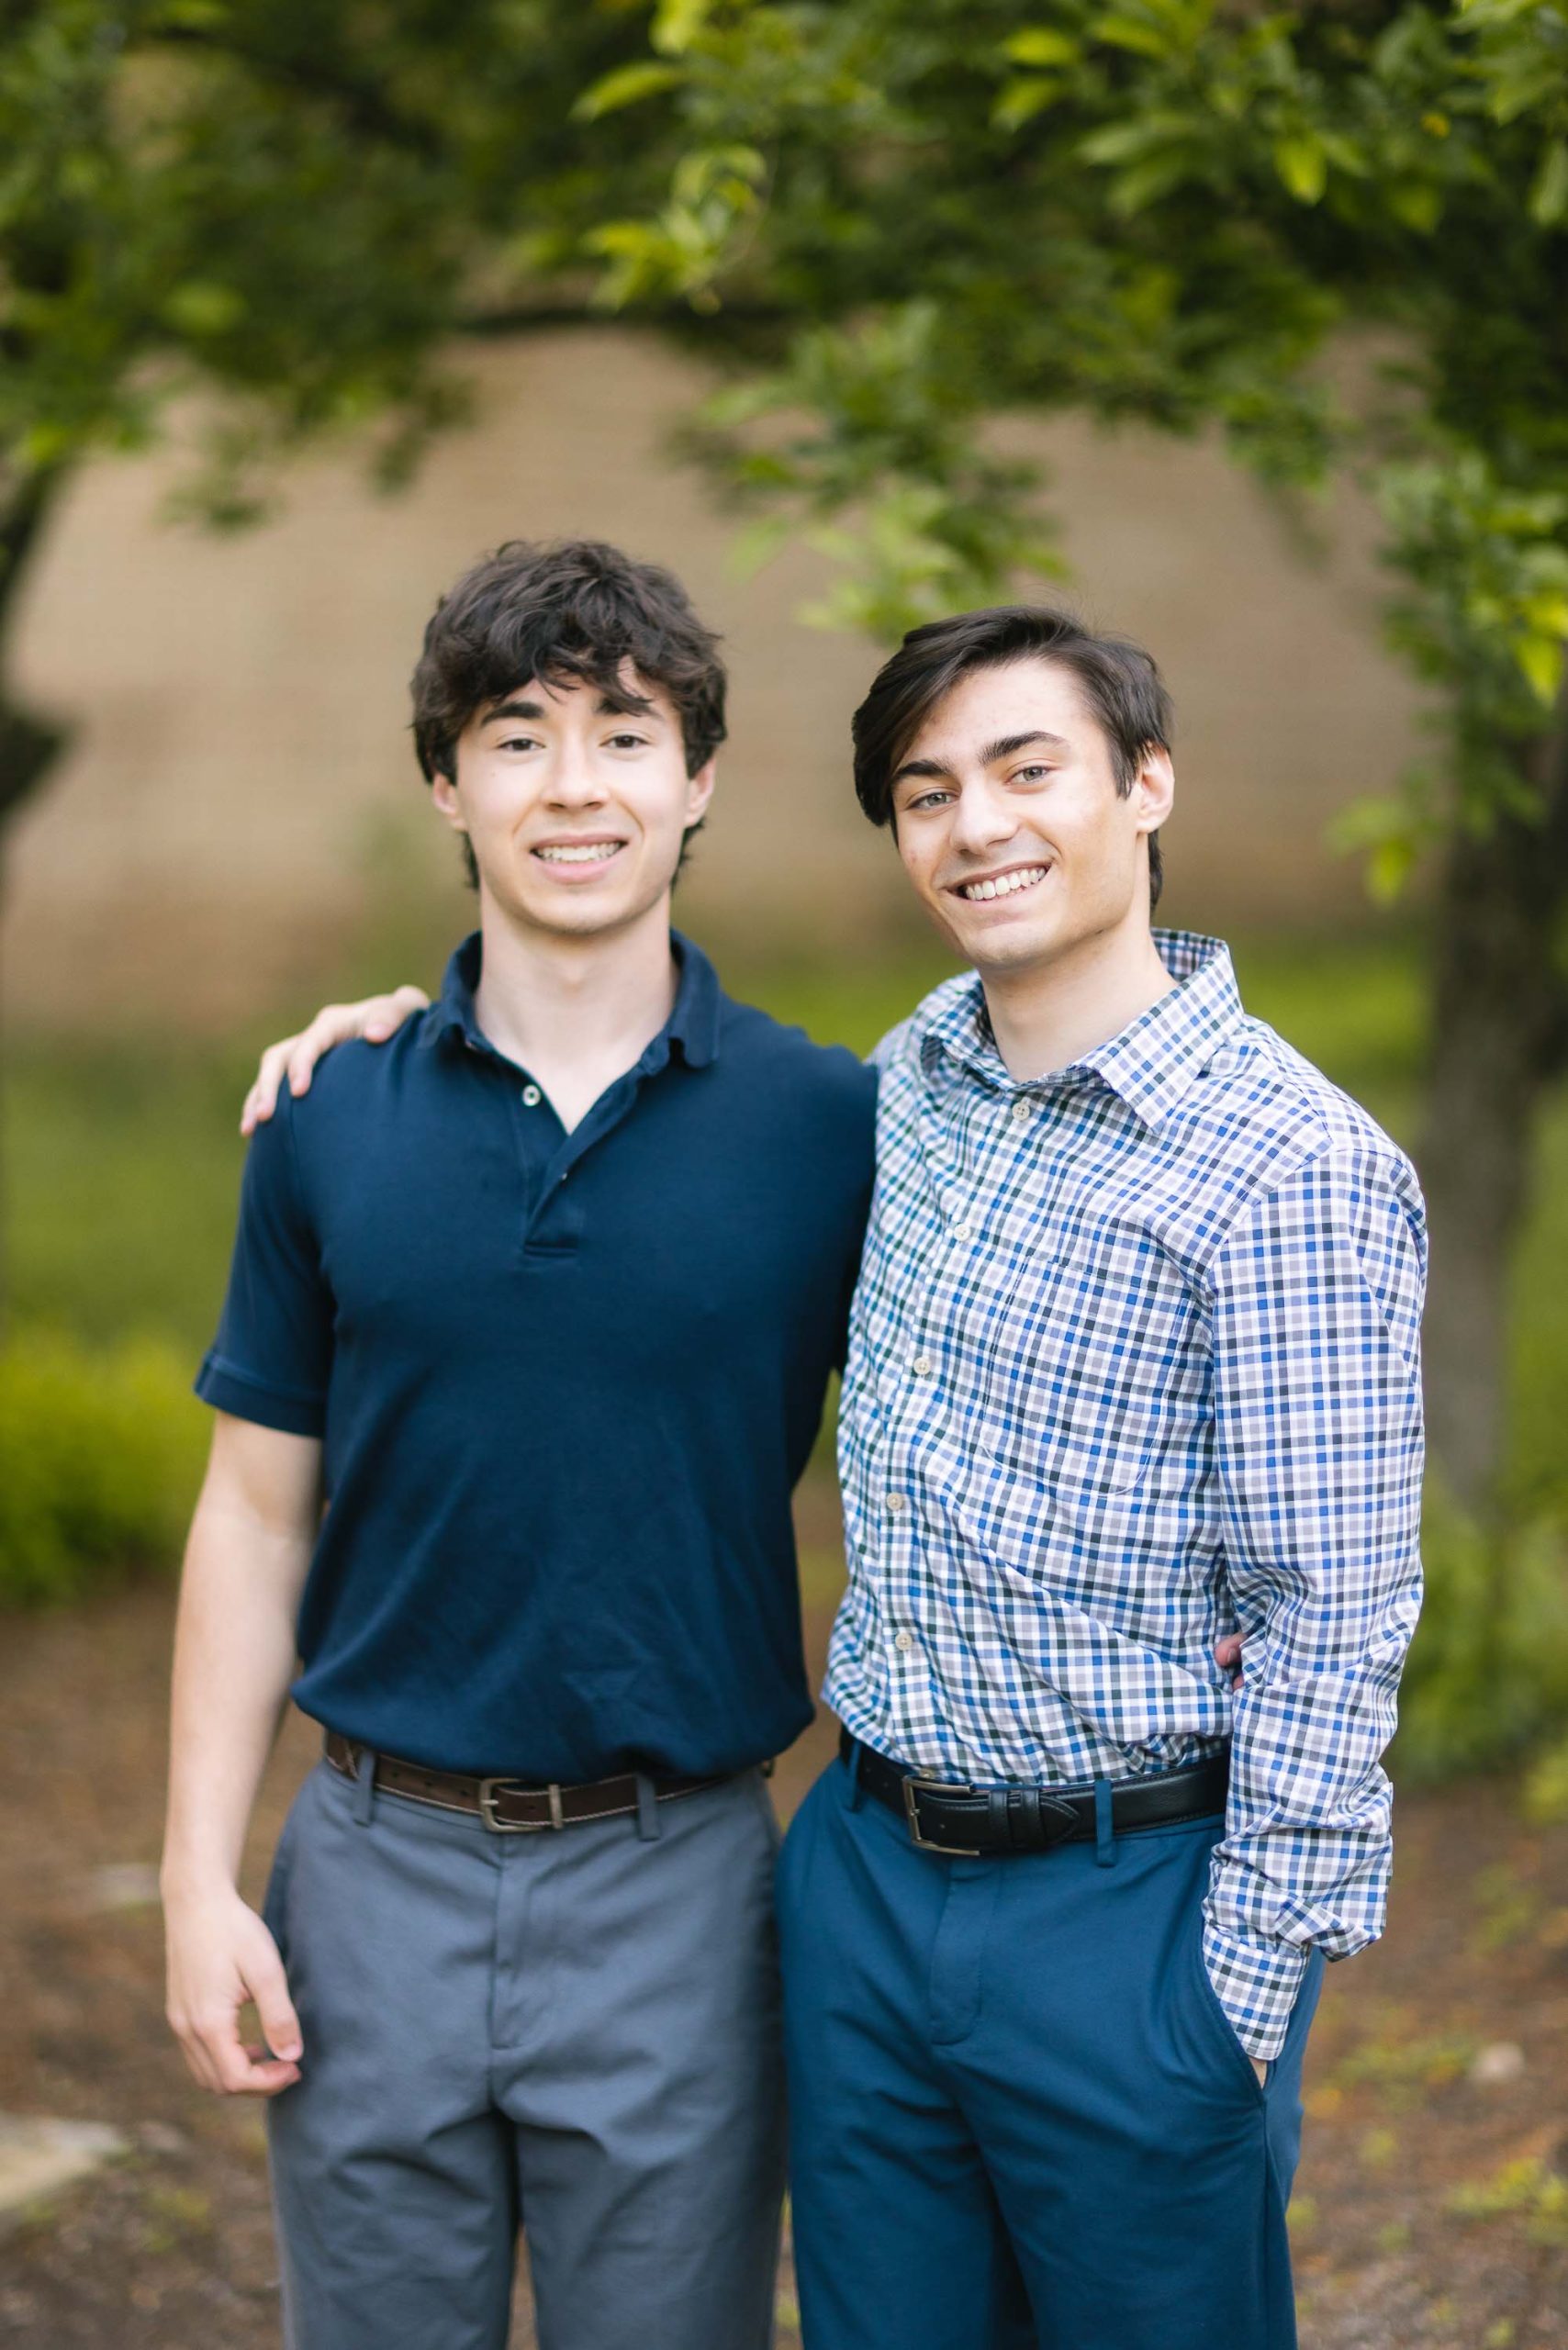 Two young high school seniors posing for a portrait in a park.